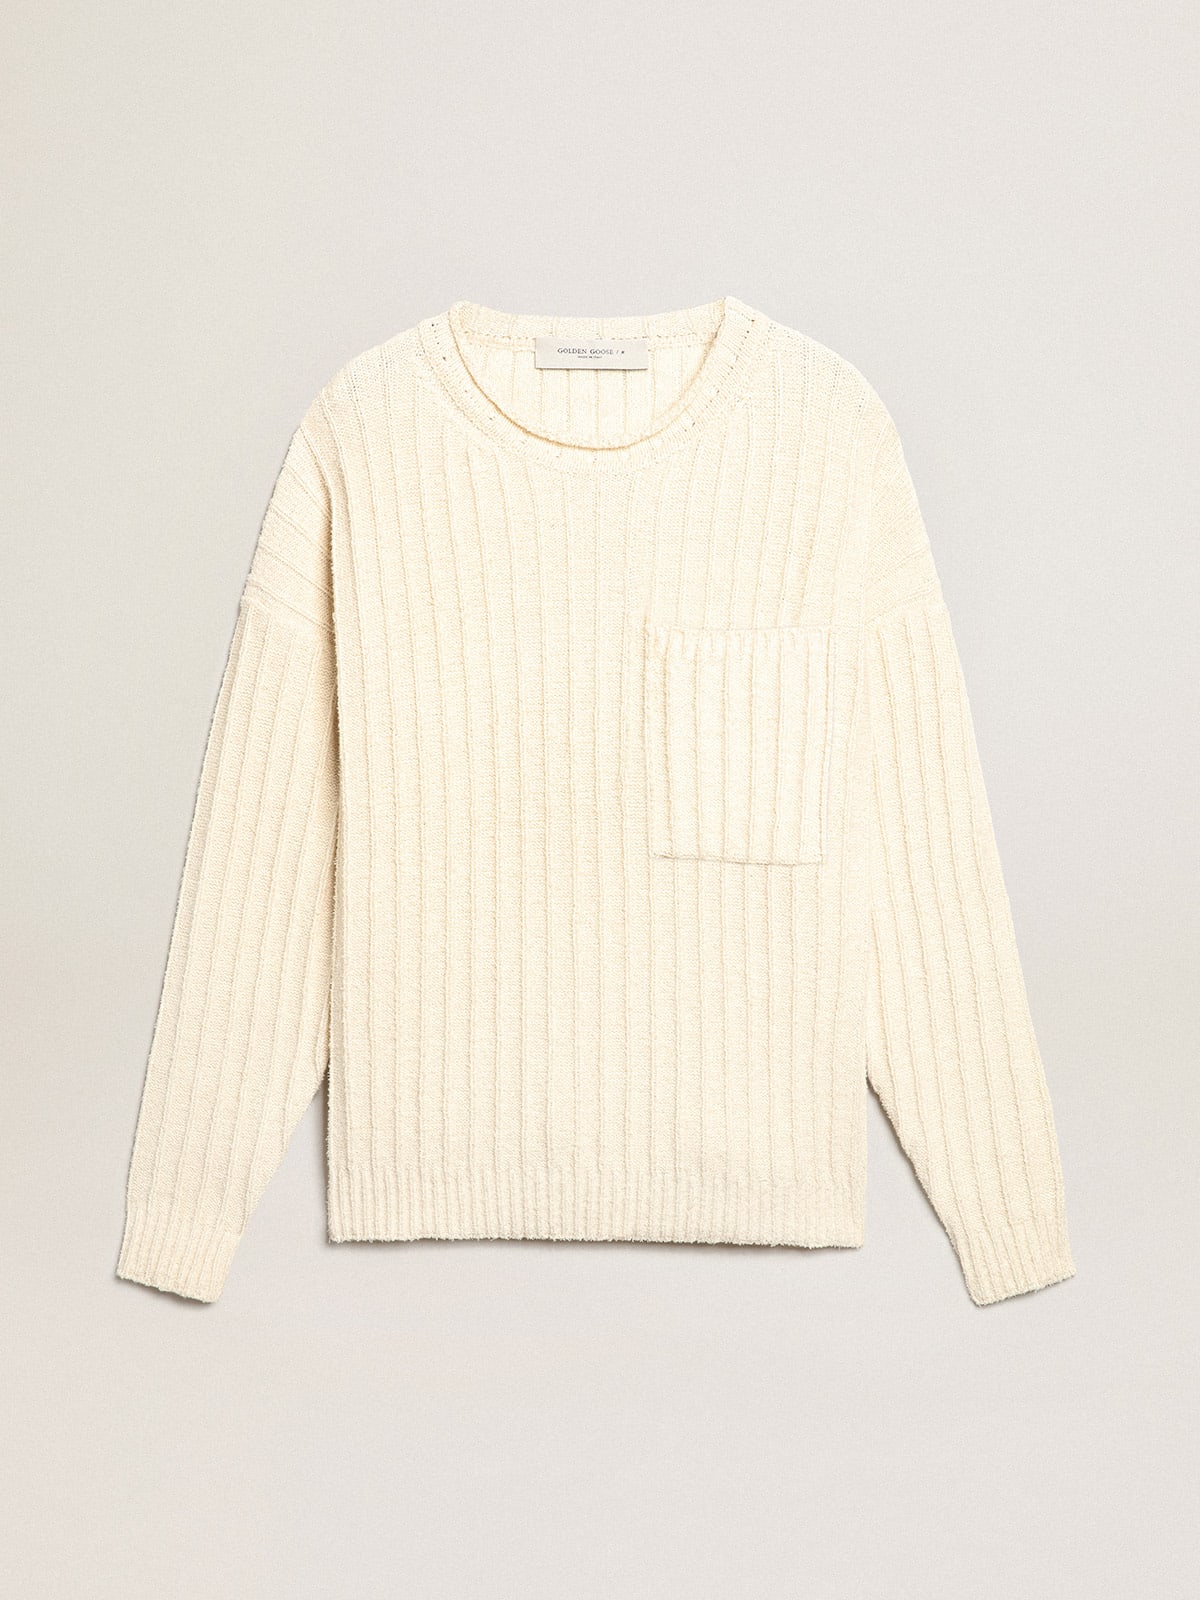 Round-neck sweater in papyrus-colored cotton-blend yarn